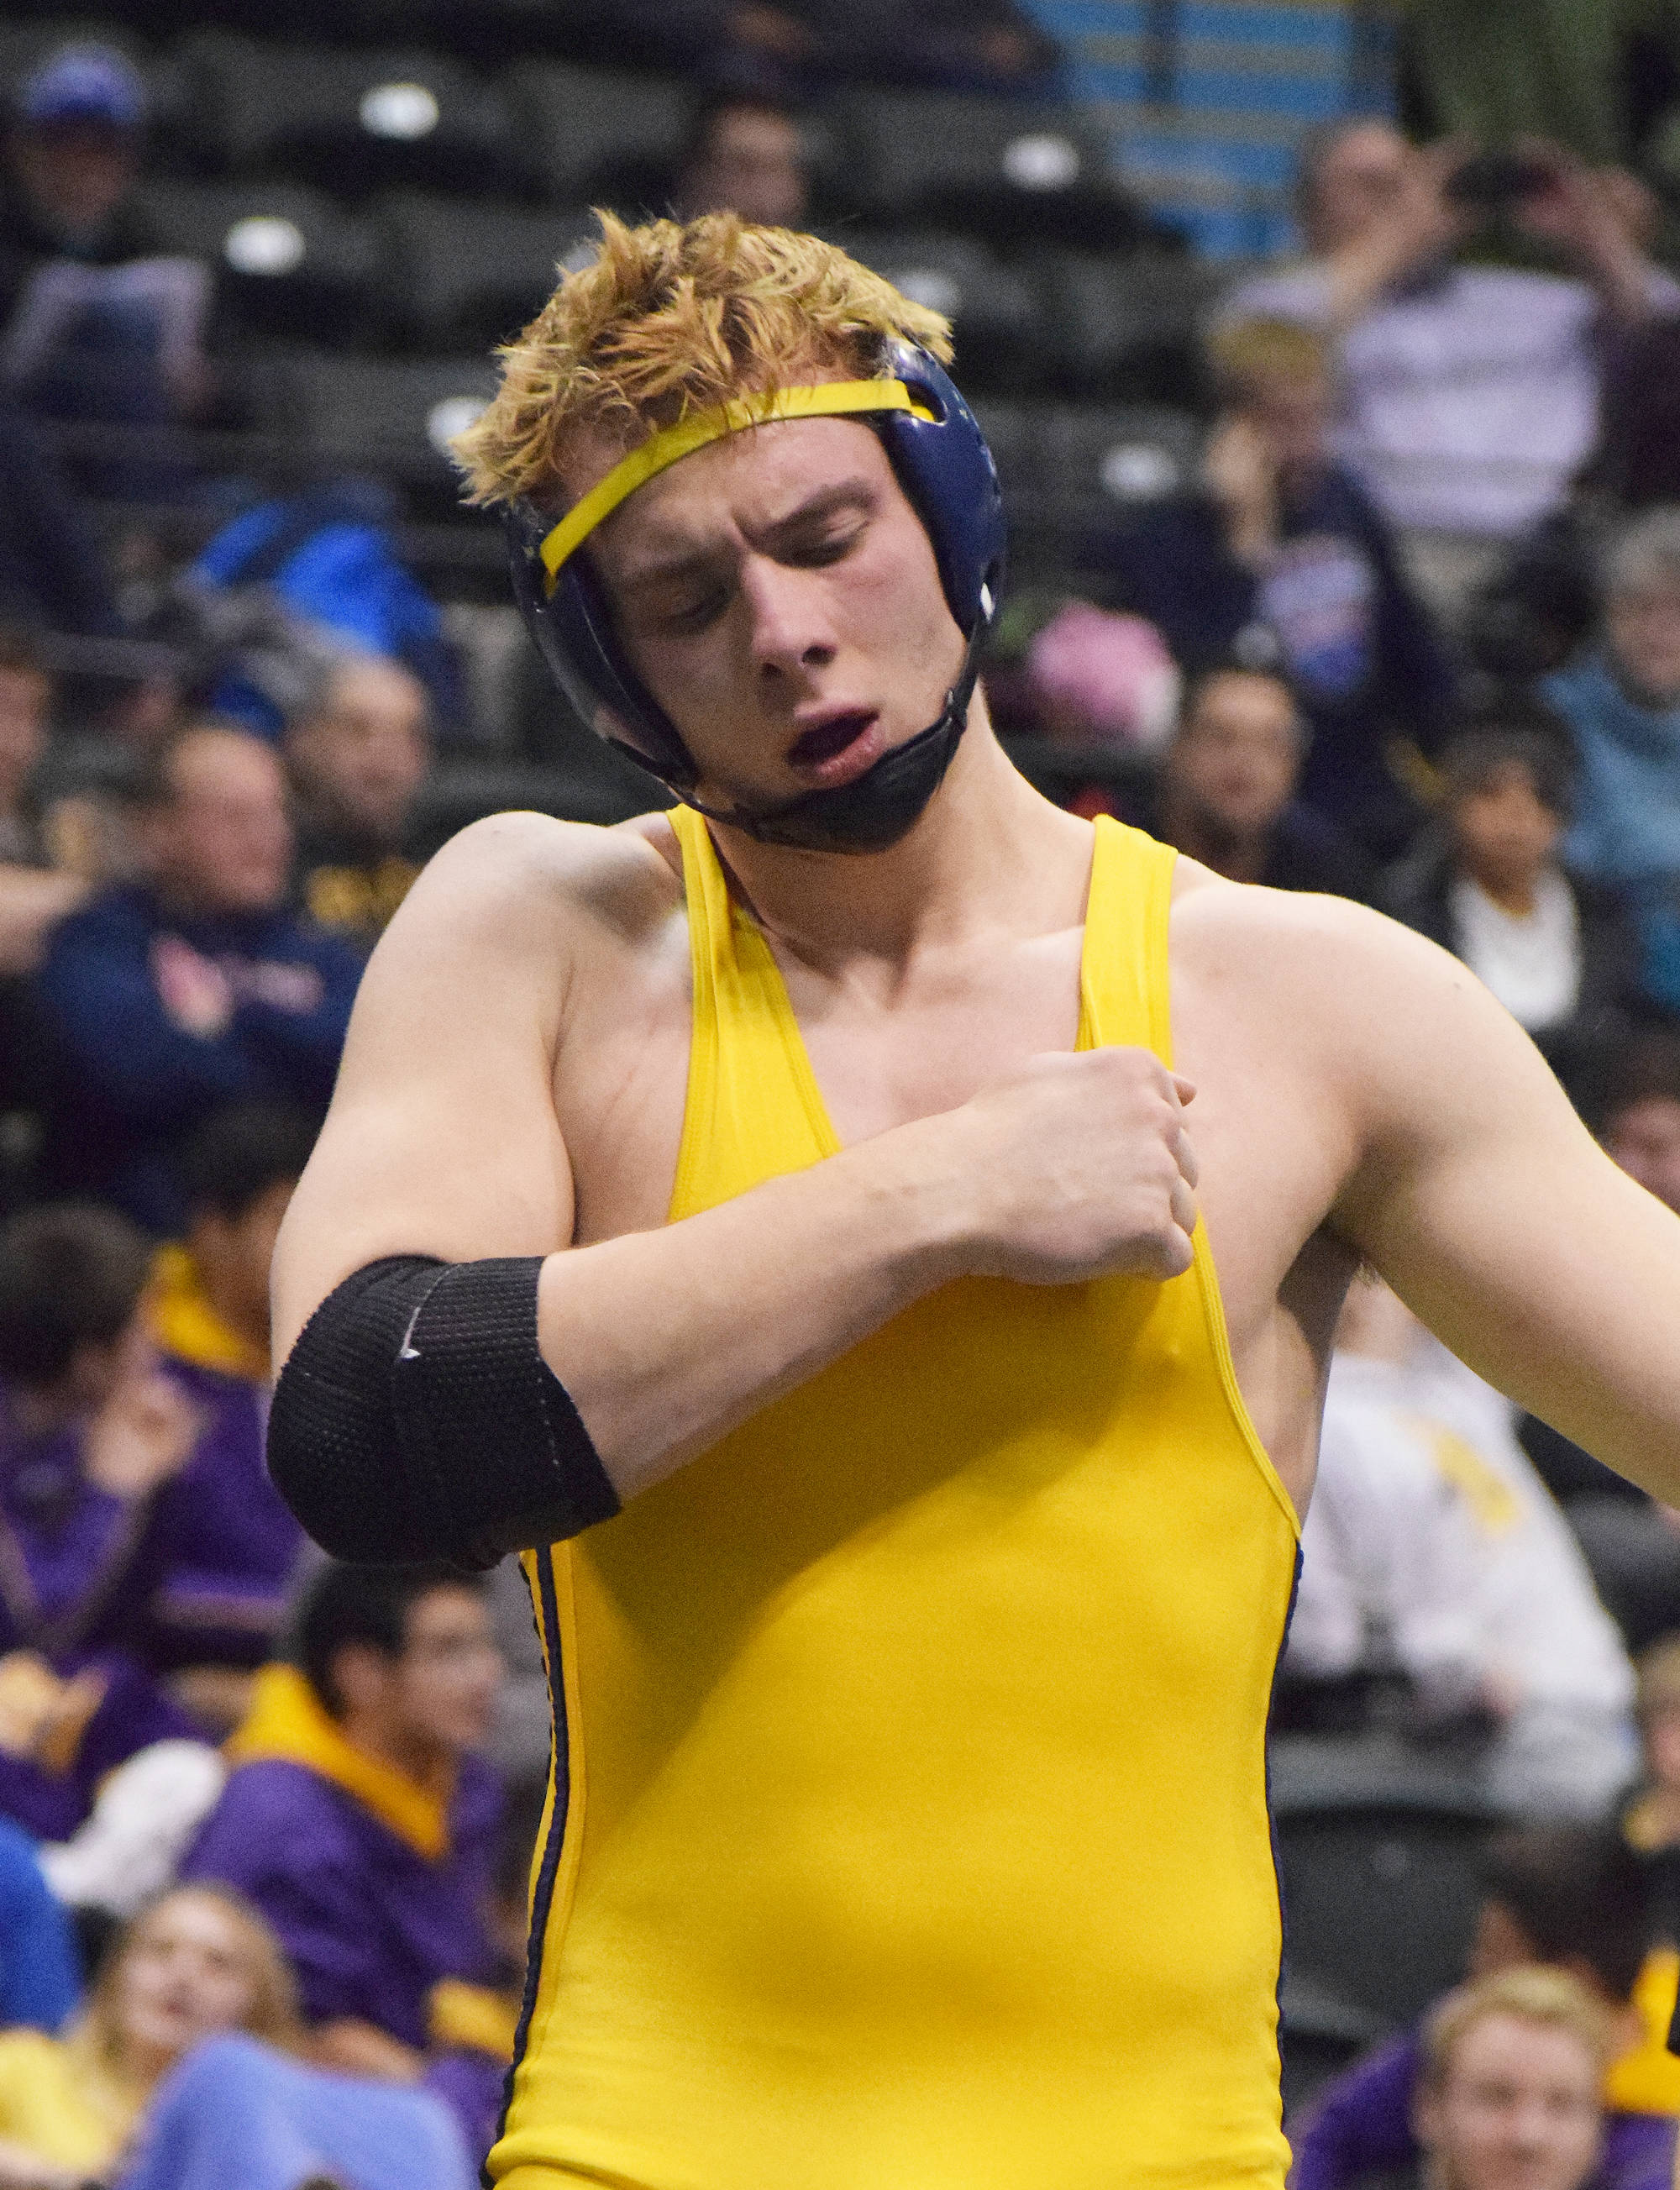 Levi King of Homer pounds his chest in celebration after winning the 195-pound Division II title Saturday night at the state wrestling championships at the Alaska Airlines Center in Anchorage. (Photo by Joey Klecka/Peninsula Clarion)